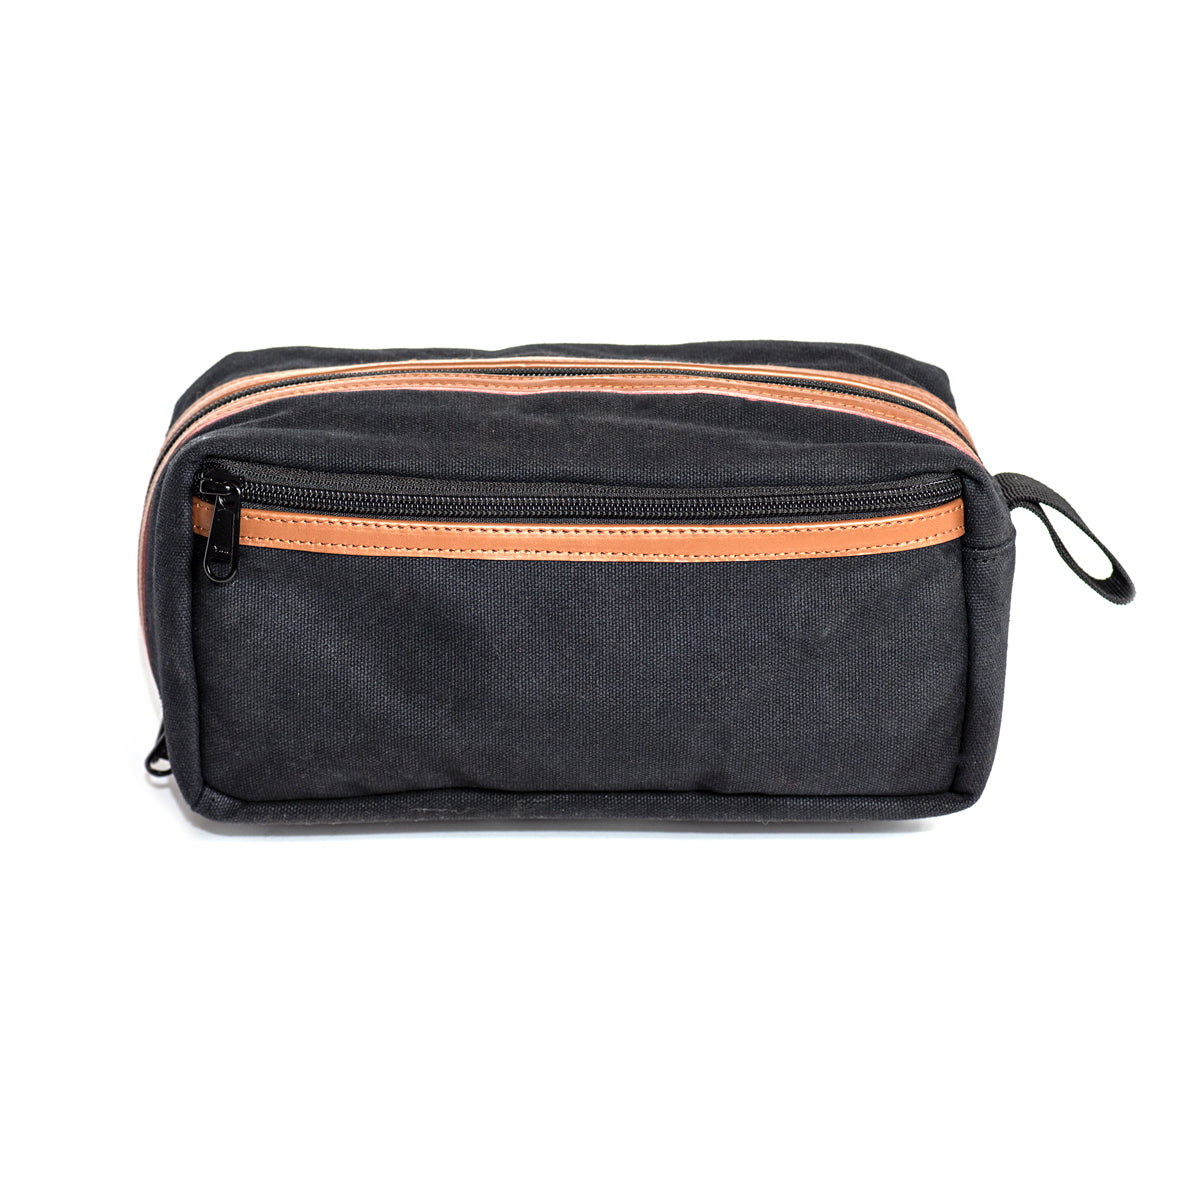 The Loaded Badass Canvas Travel Bag